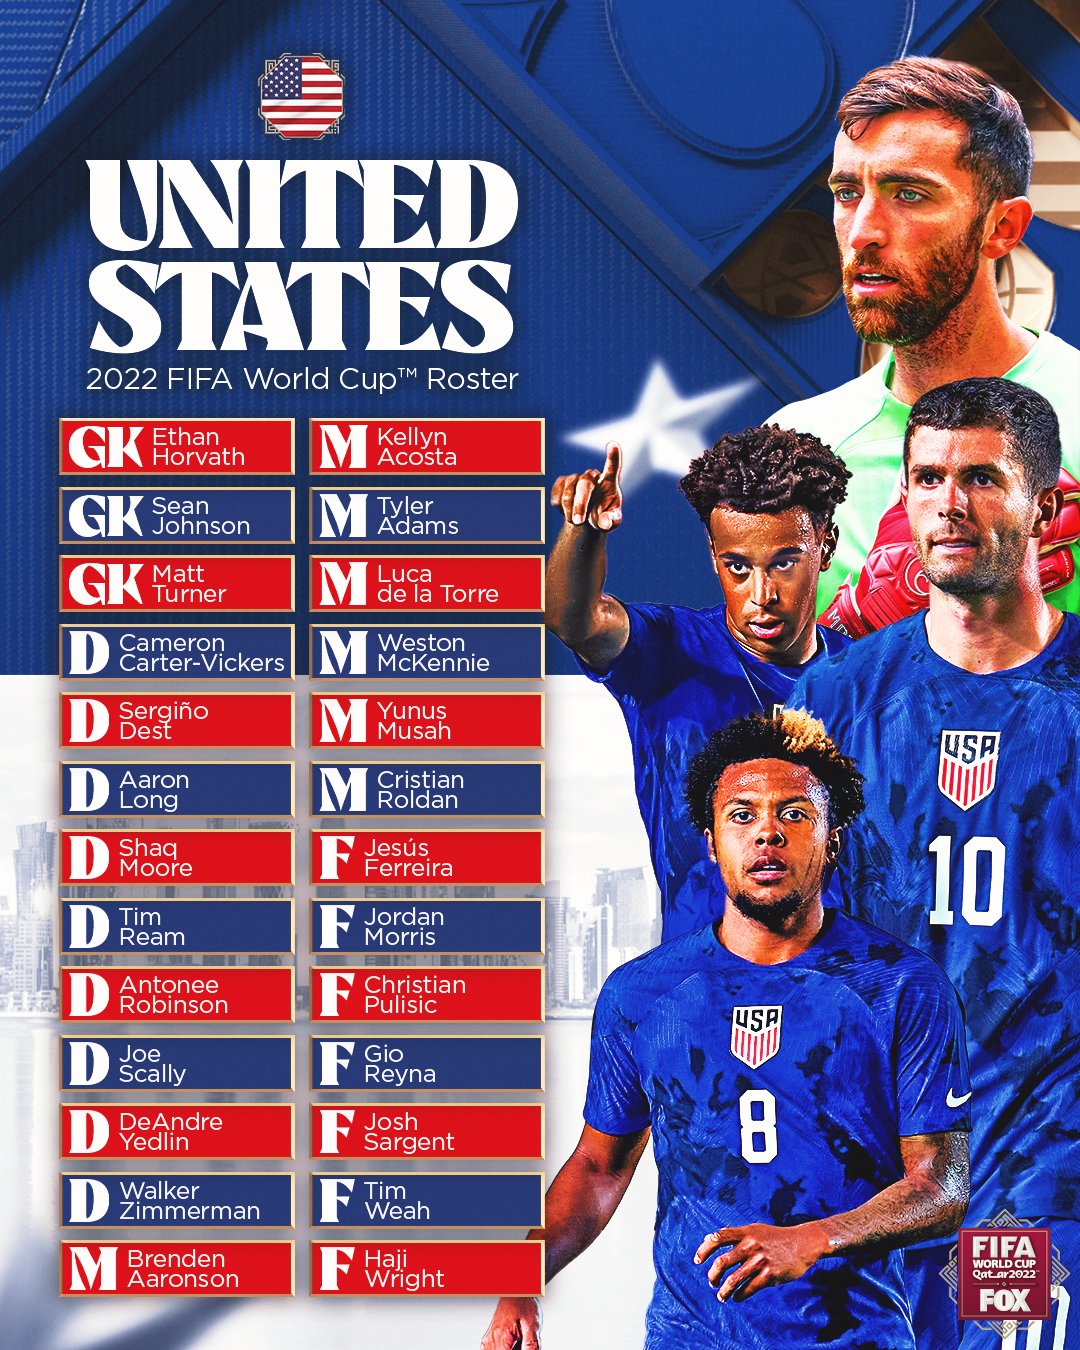 FOX Soccer on Twitter "The USMNT FIFA World Cup roster is SET 🇺🇸🙌